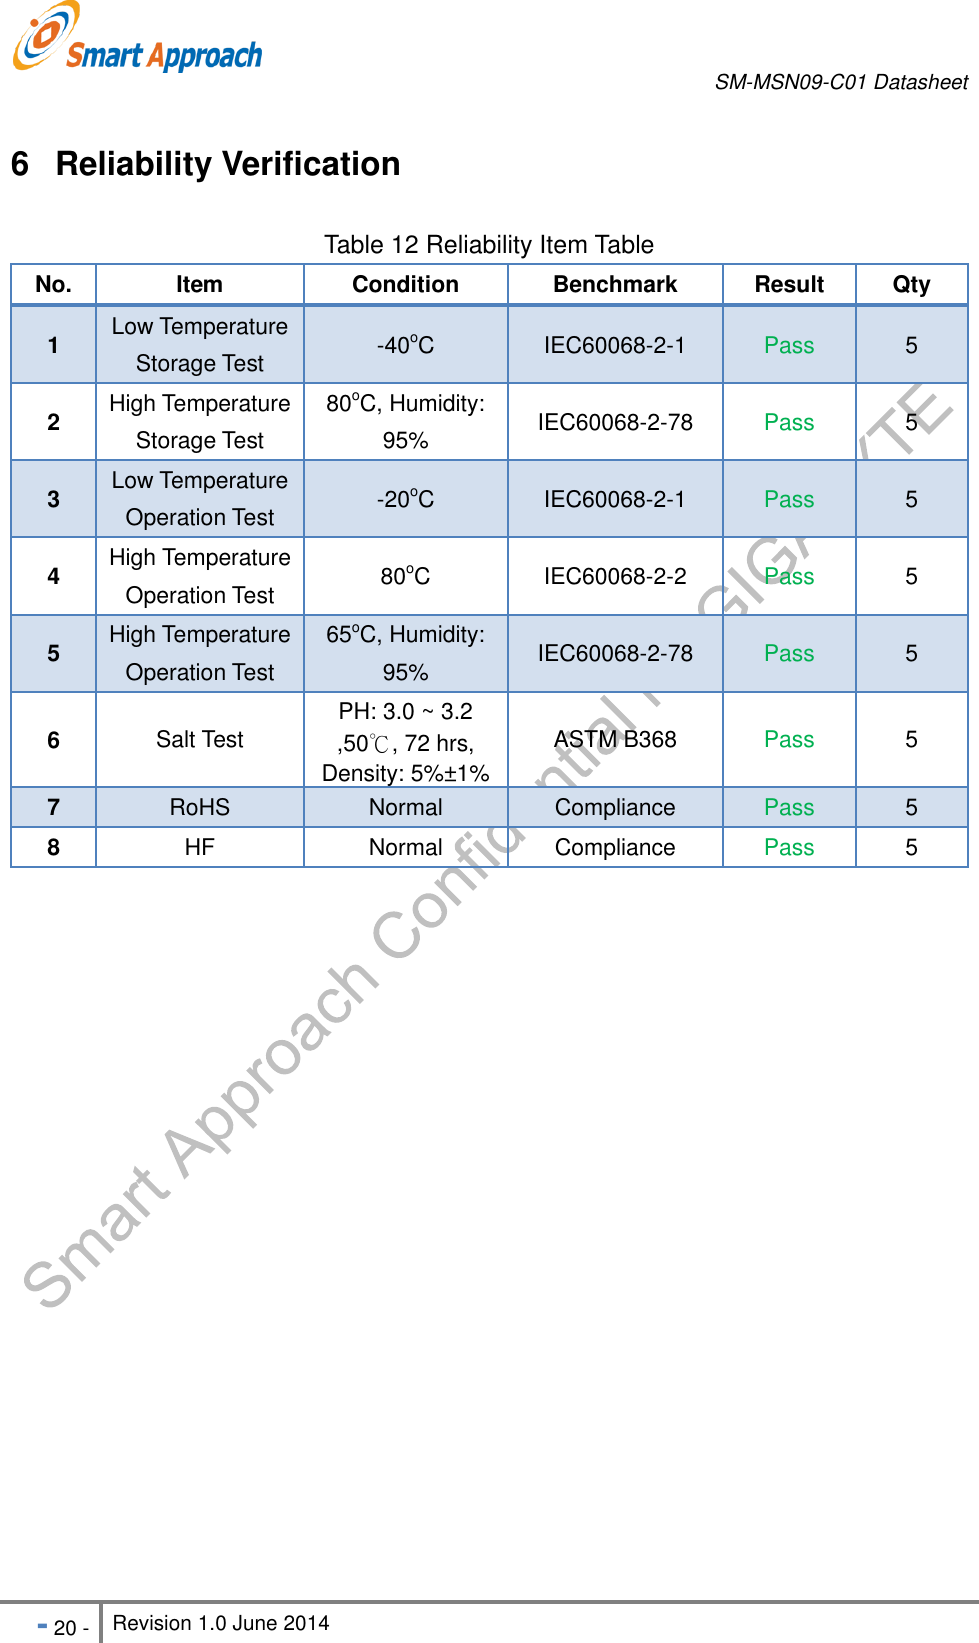       SM-MSN09-C01 Datasheet   - 20 - Revision 1.0 June 2014                                                            6  Reliability Verification Table 12 Reliability Item Table No. Item Condition Benchmark Result Qty 1 Low Temperature Storage Test -40oC IEC60068-2-1 Pass 5 2 High Temperature Storage Test 80oC, Humidity: 95% IEC60068-2-78 Pass 5 3 Low Temperature Operation Test -20oC IEC60068-2-1 Pass 5 4 High Temperature Operation Test 80oC IEC60068-2-2 Pass 5 5 High Temperature Operation Test 65oC, Humidity: 95% IEC60068-2-78 Pass 5 6 Salt Test PH: 3.0 ~ 3.2 ,50℃, 72 hrs, Density: 5%±1% ASTM B368 Pass 5 7 RoHS Normal Compliance Pass 5 8 HF Normal Compliance Pass 5     